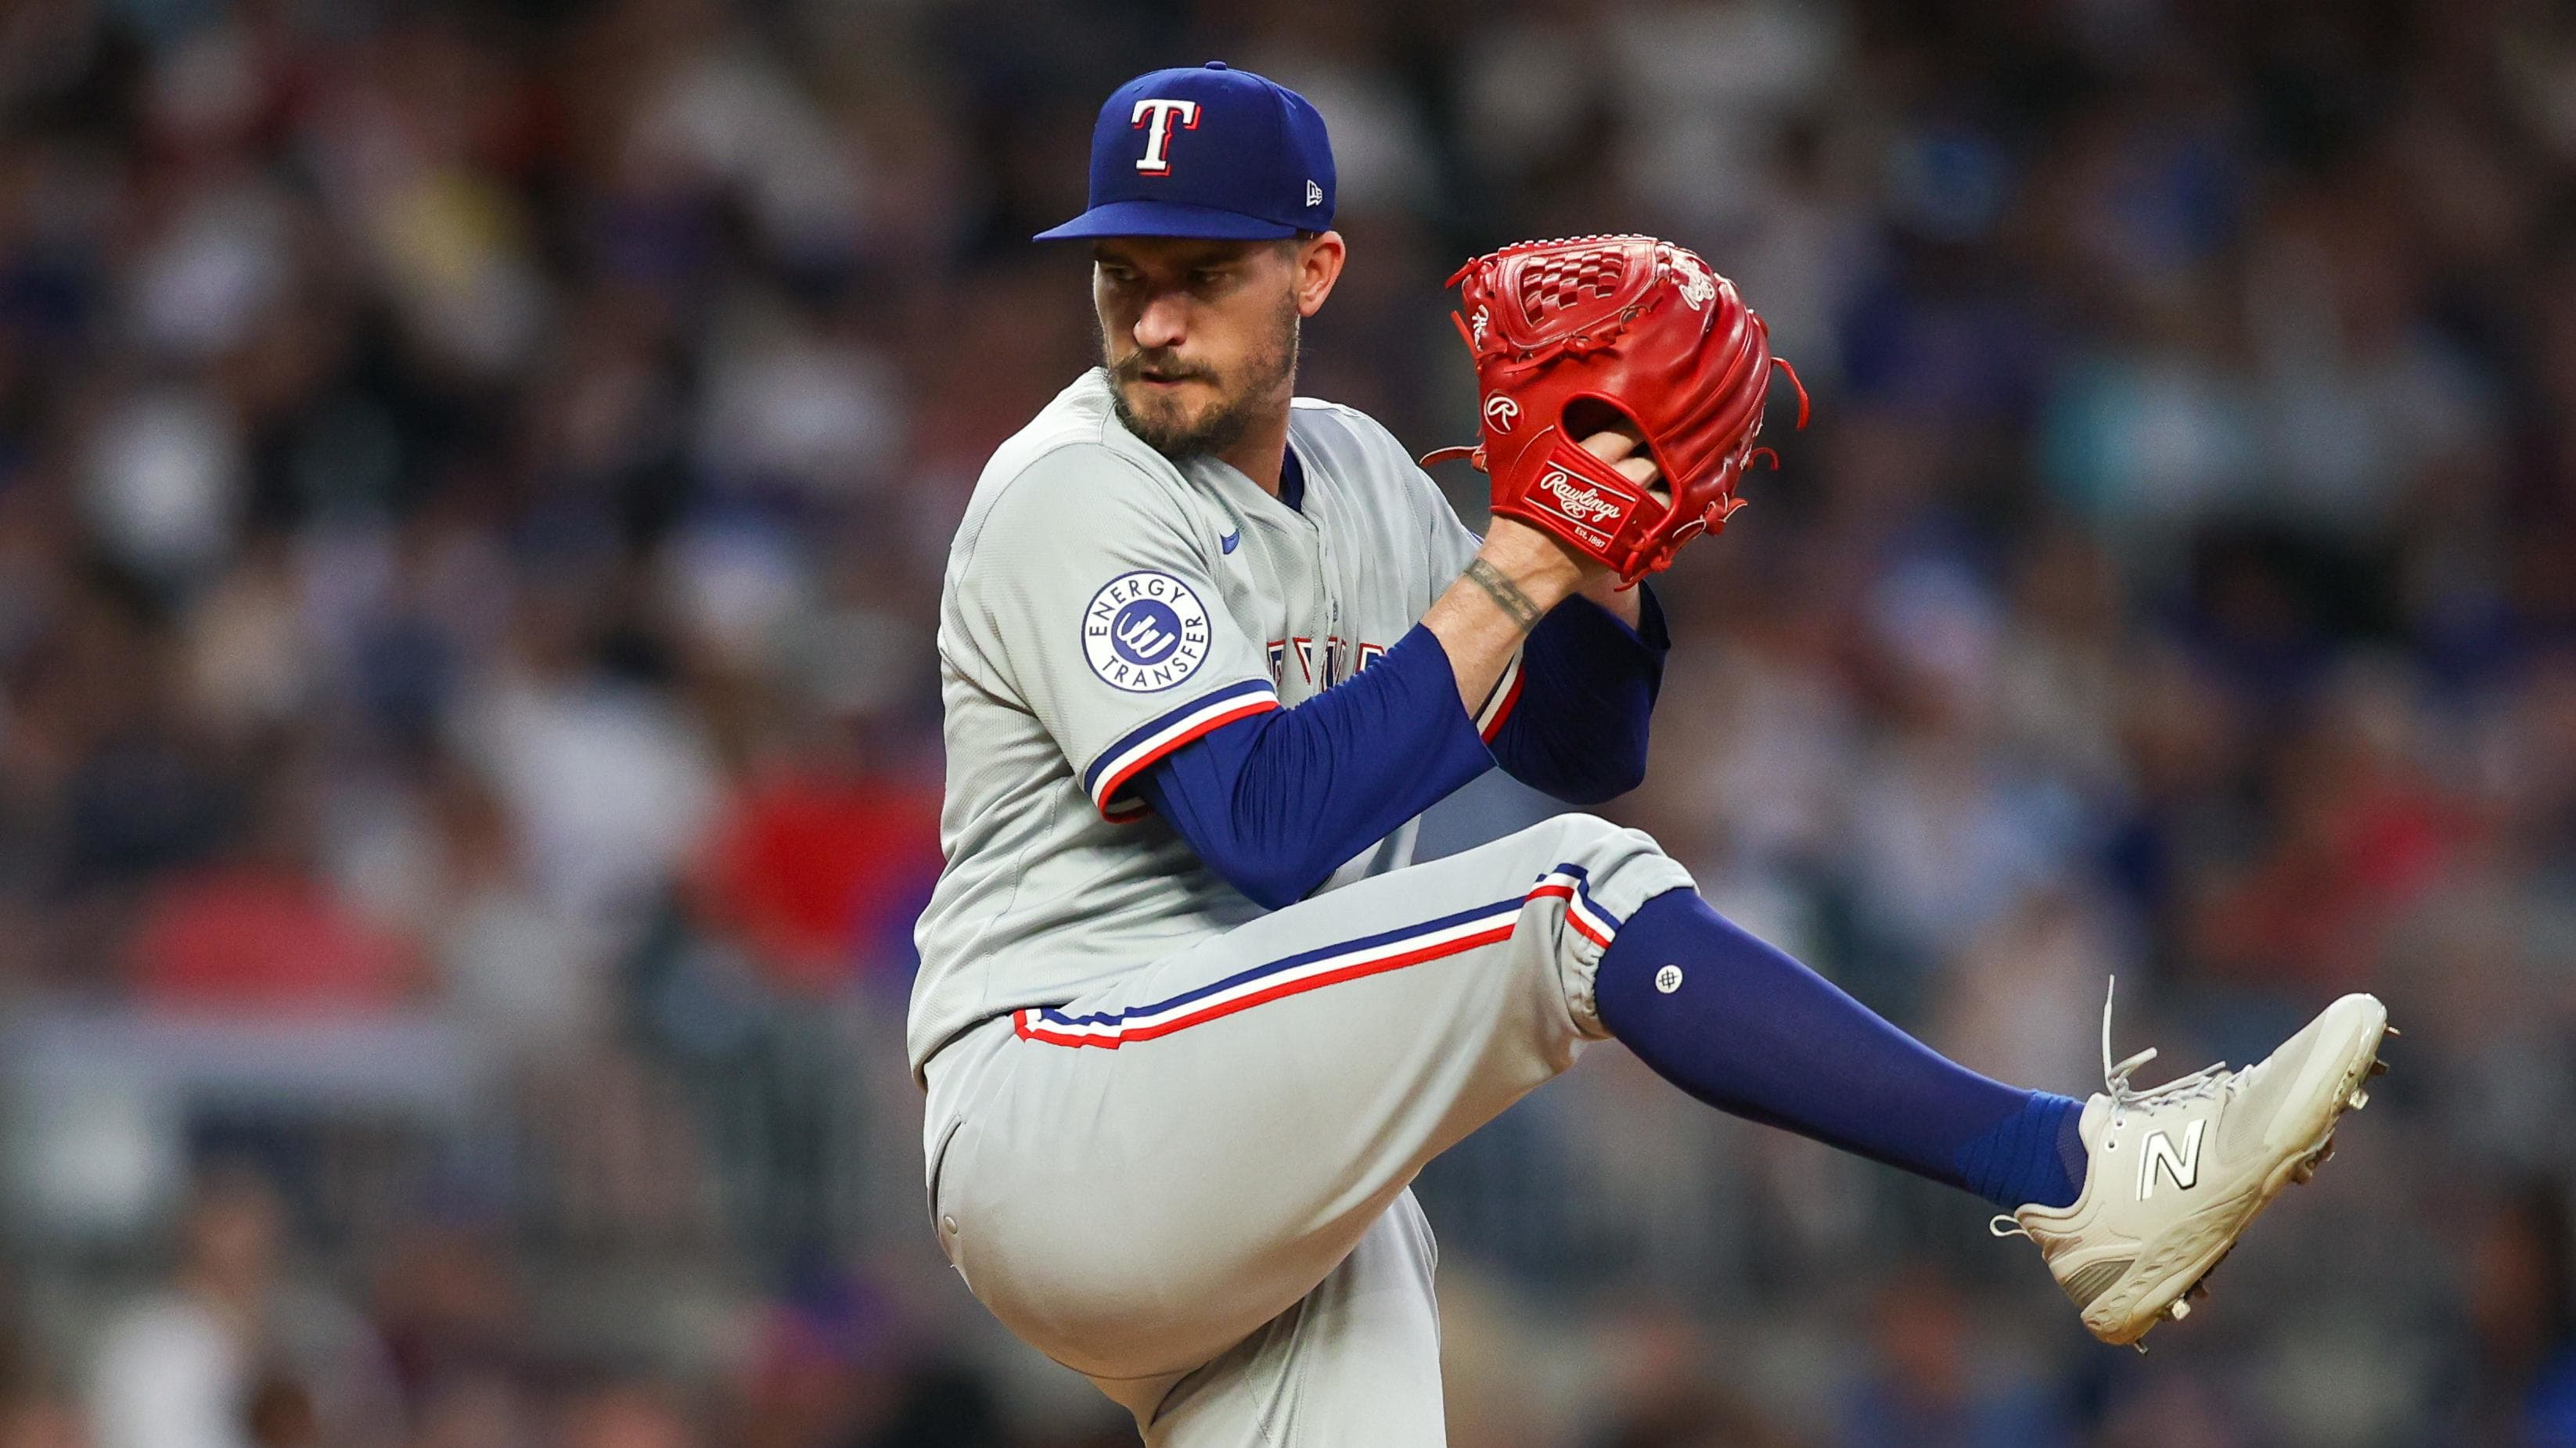 Texas Rangers vs. Oakland Athletics: Preview, How To Watch, Listen, Stream